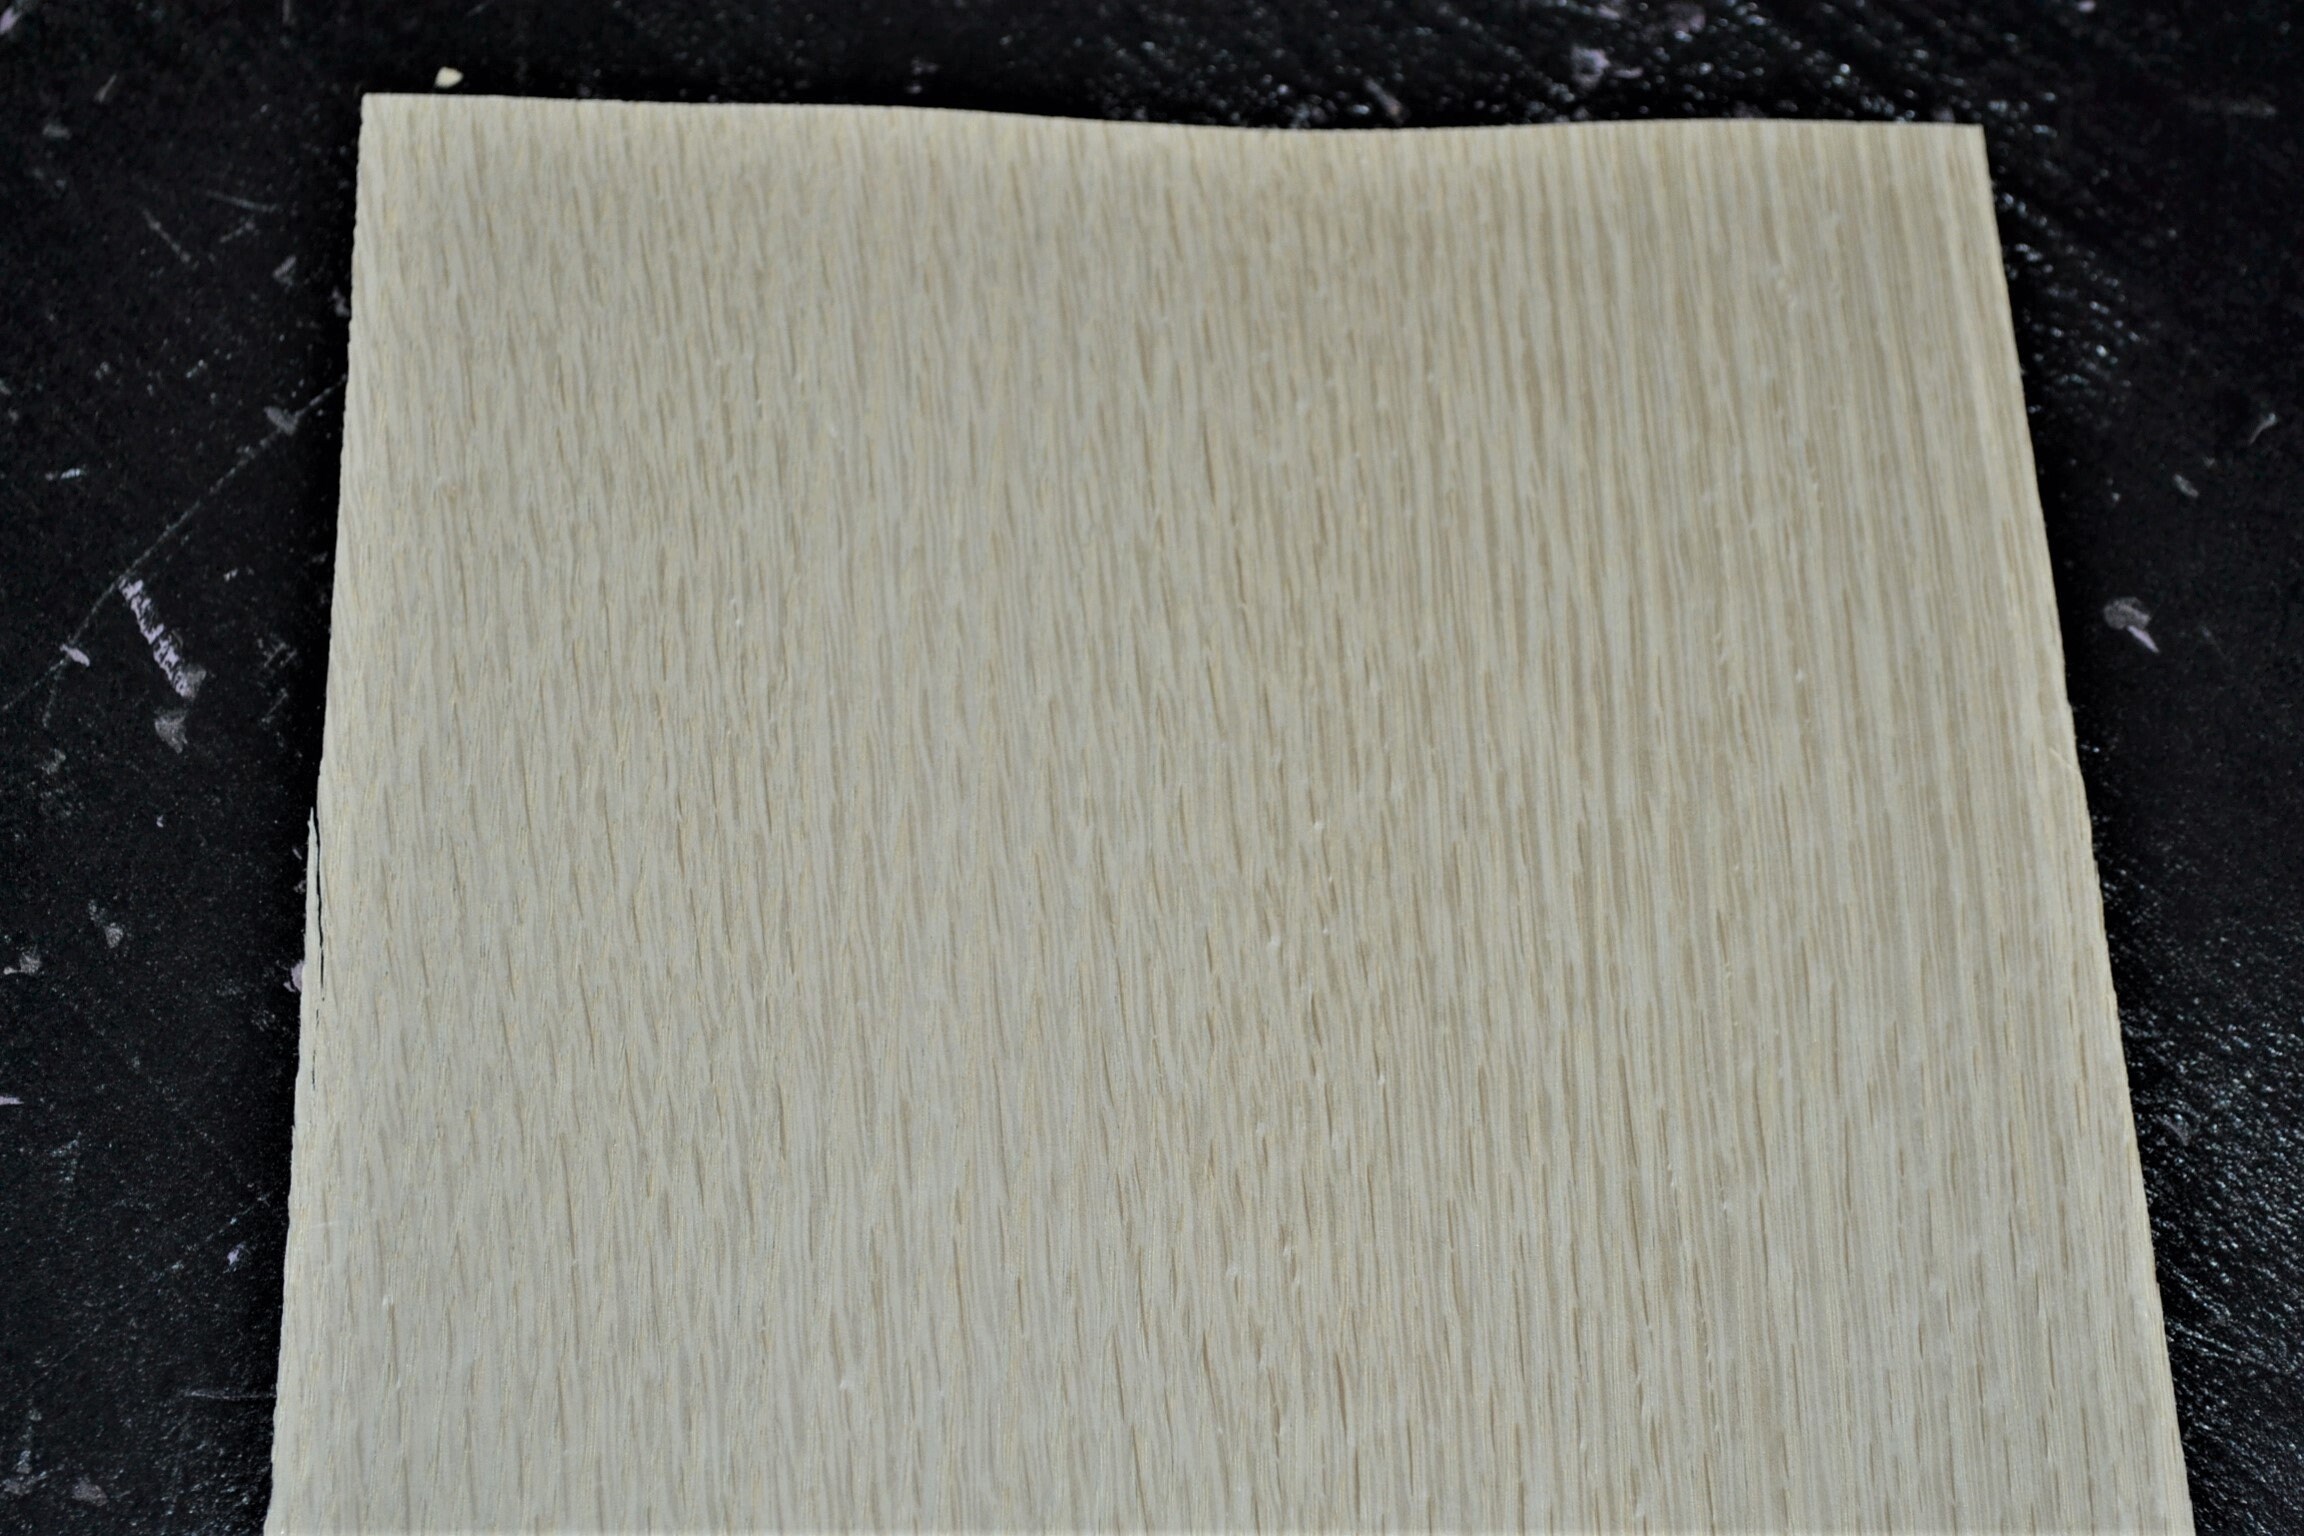 Walnut Raw Wood Veneer Sheet 7.5 X 30 Inches 1/42nd or .6mm Thick 